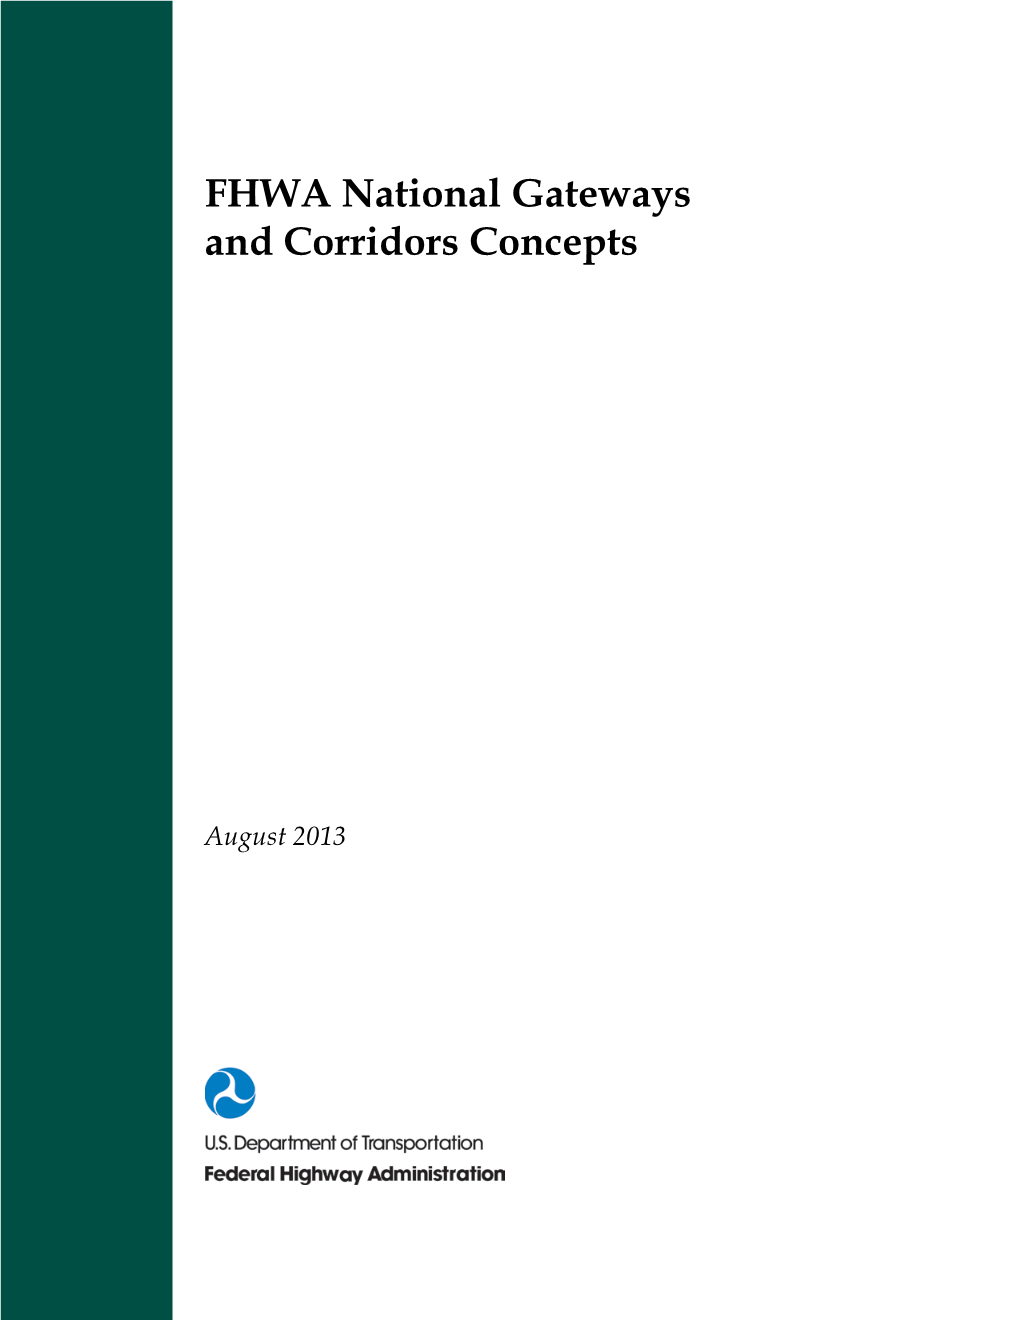 FHWA National Gateways and Corridors Concepts